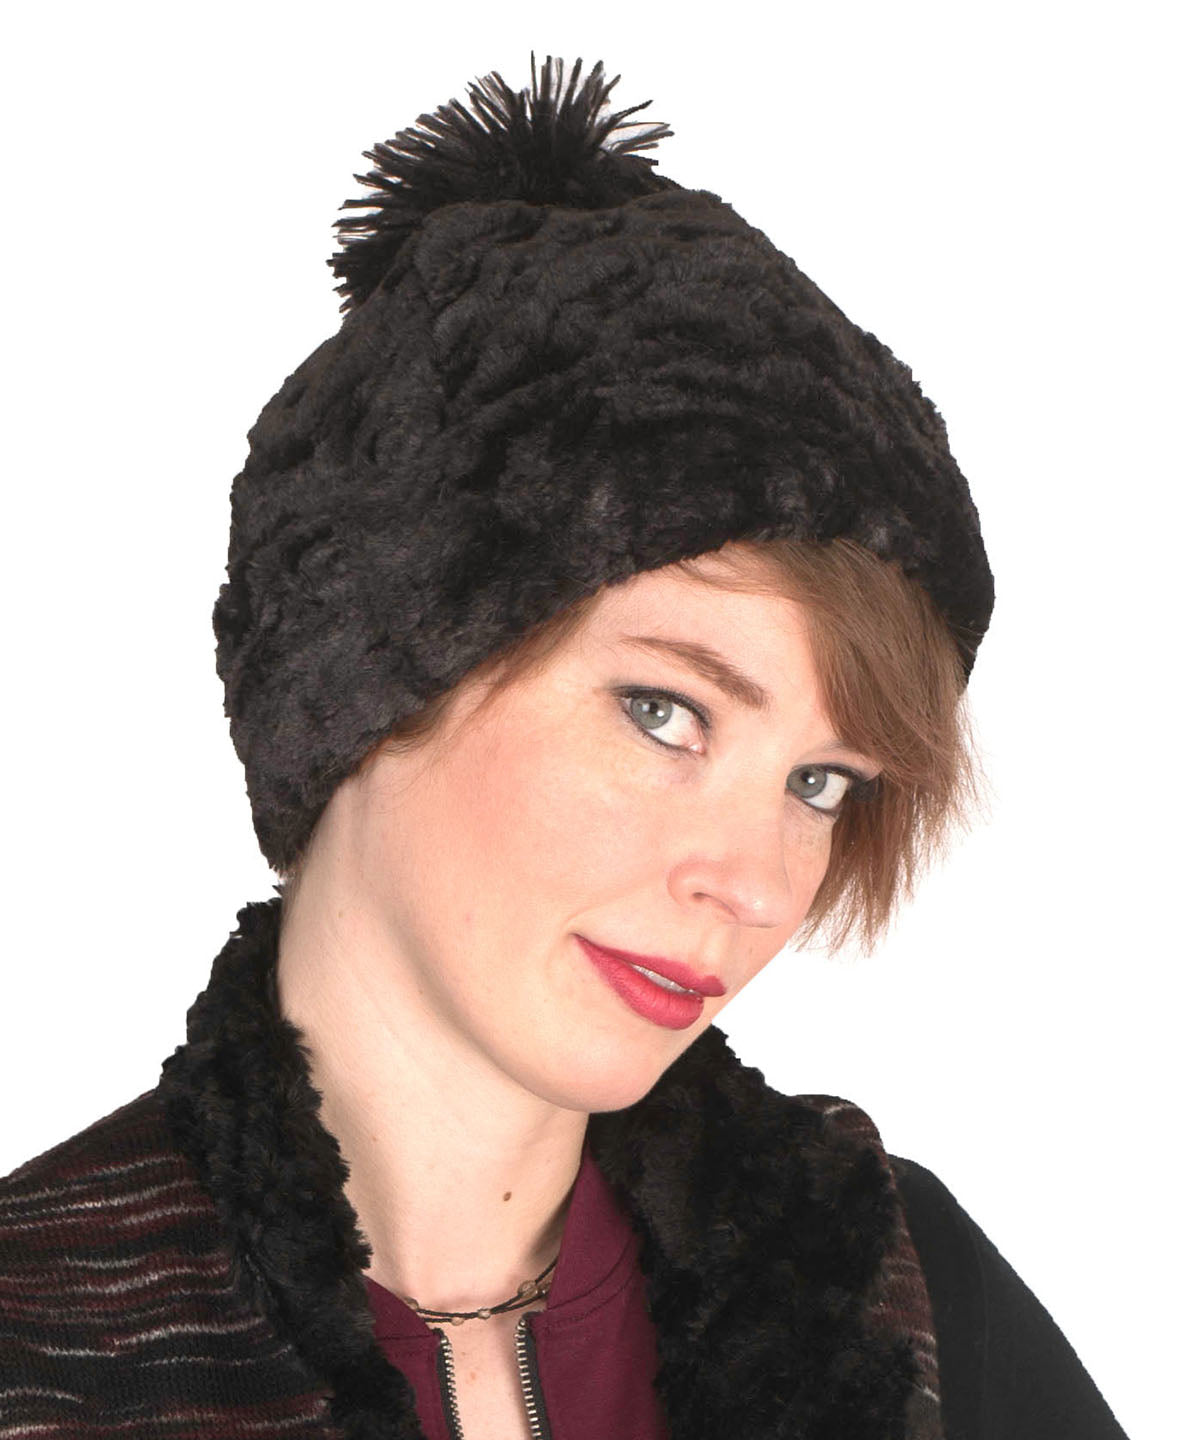 Beanie Hat Reversible Cuddly Faux in Black Lined in Cuddly Chocolate with Pom - by Pandemonium Millinery